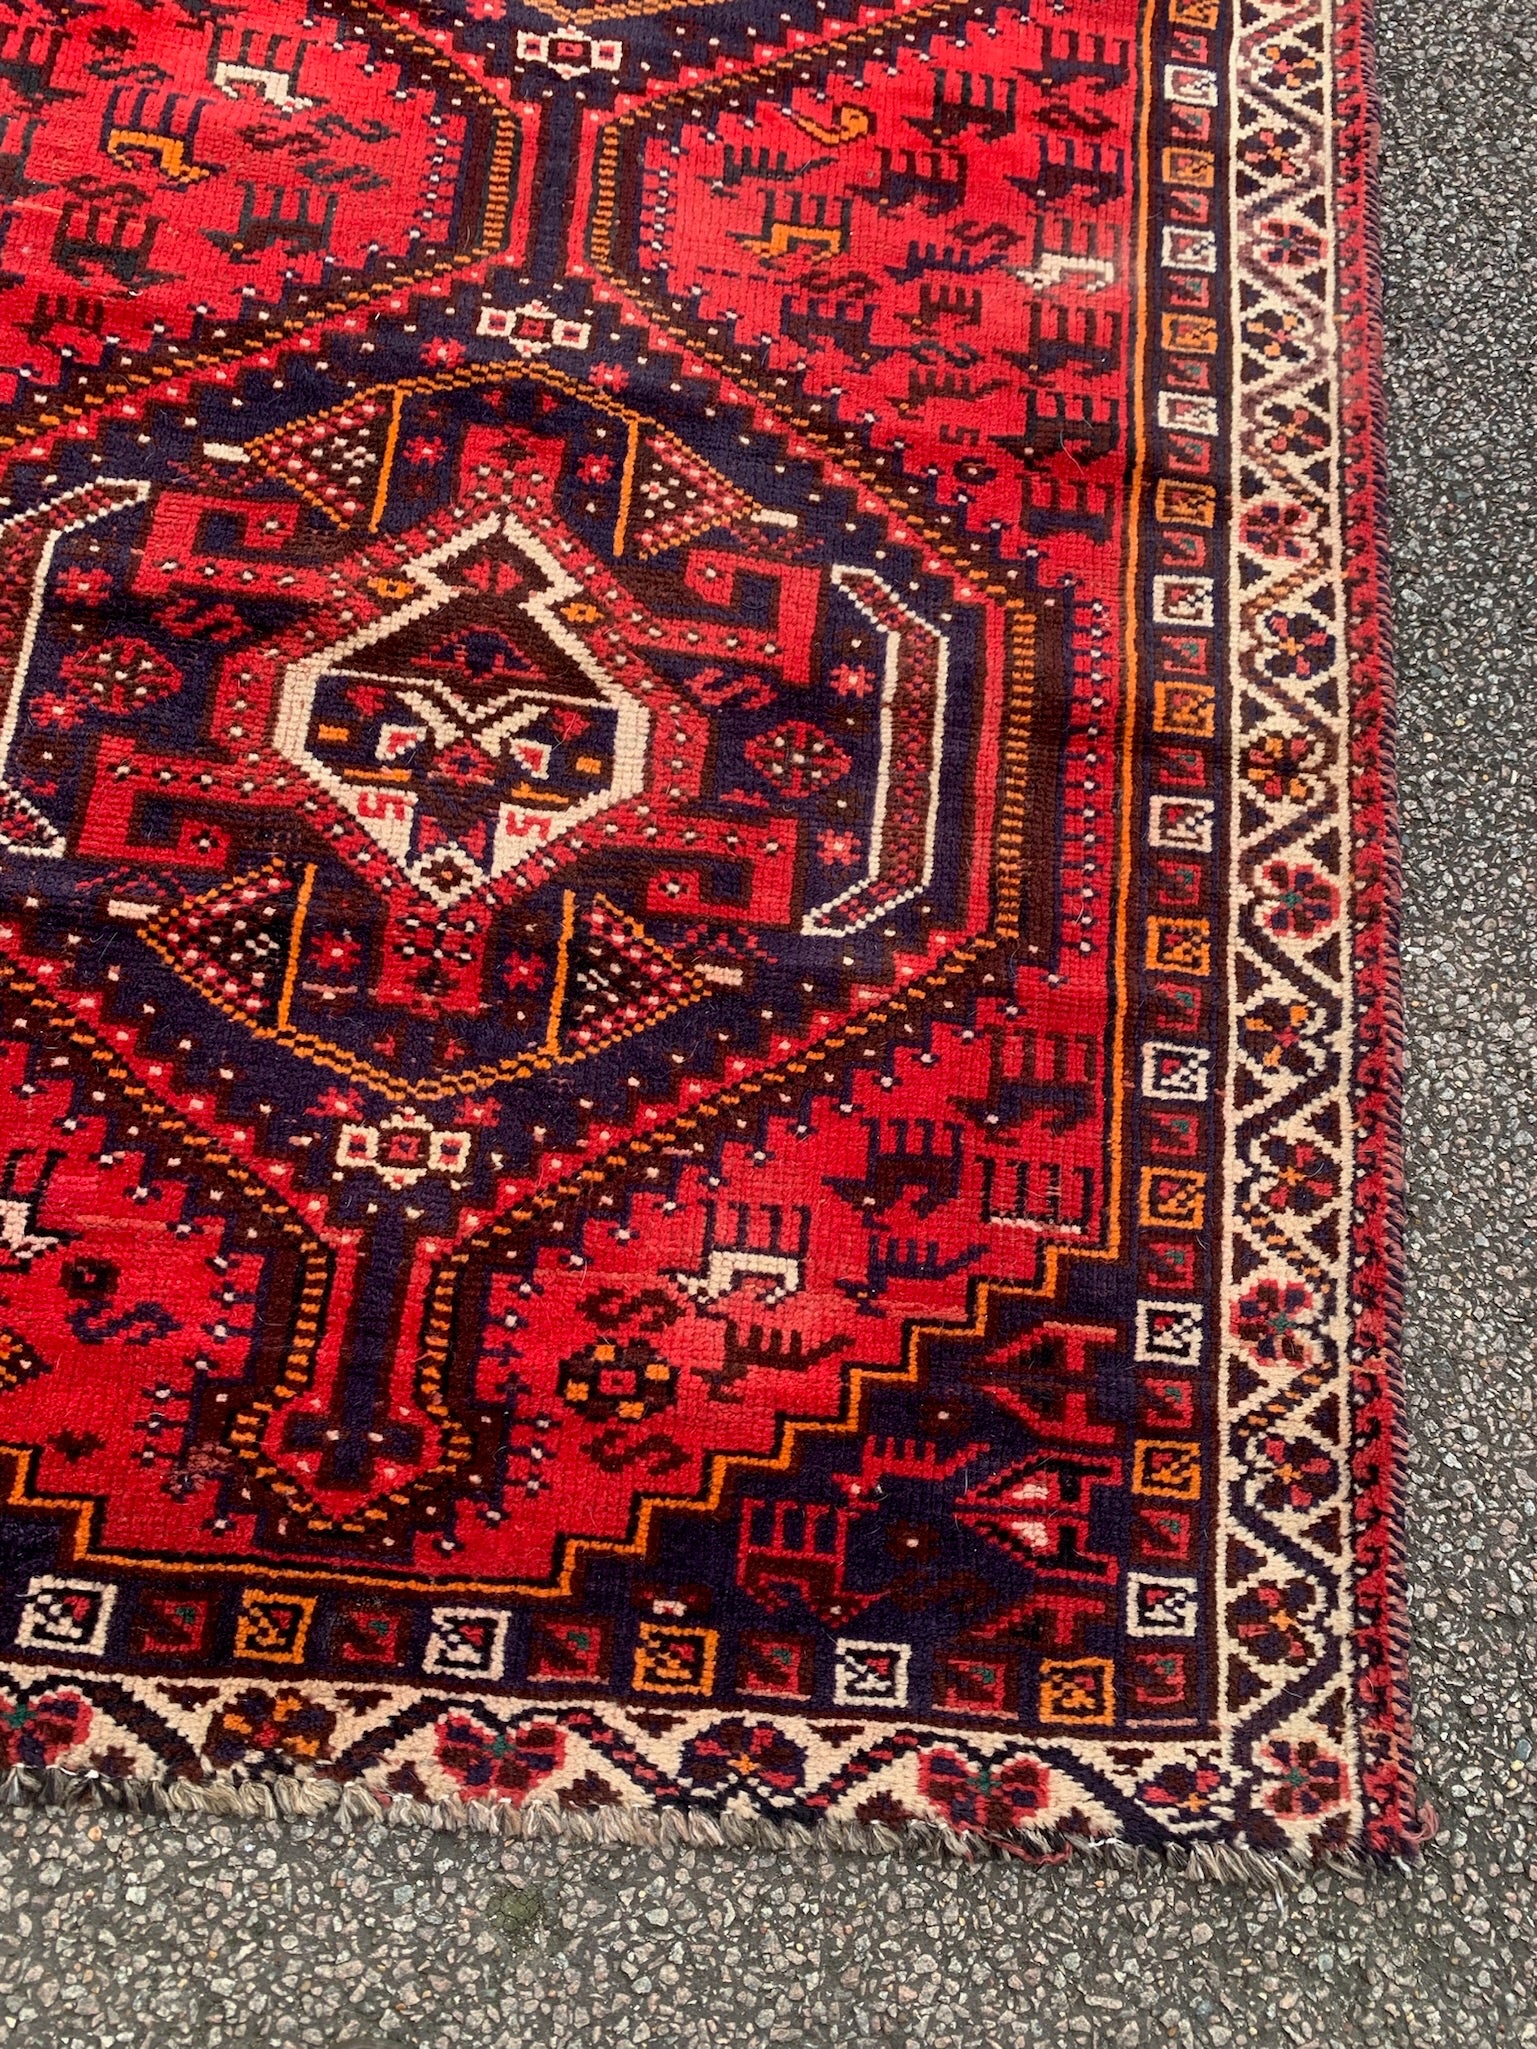 A very long red ground Persian runner rug - 375cm x 128cm - Belle